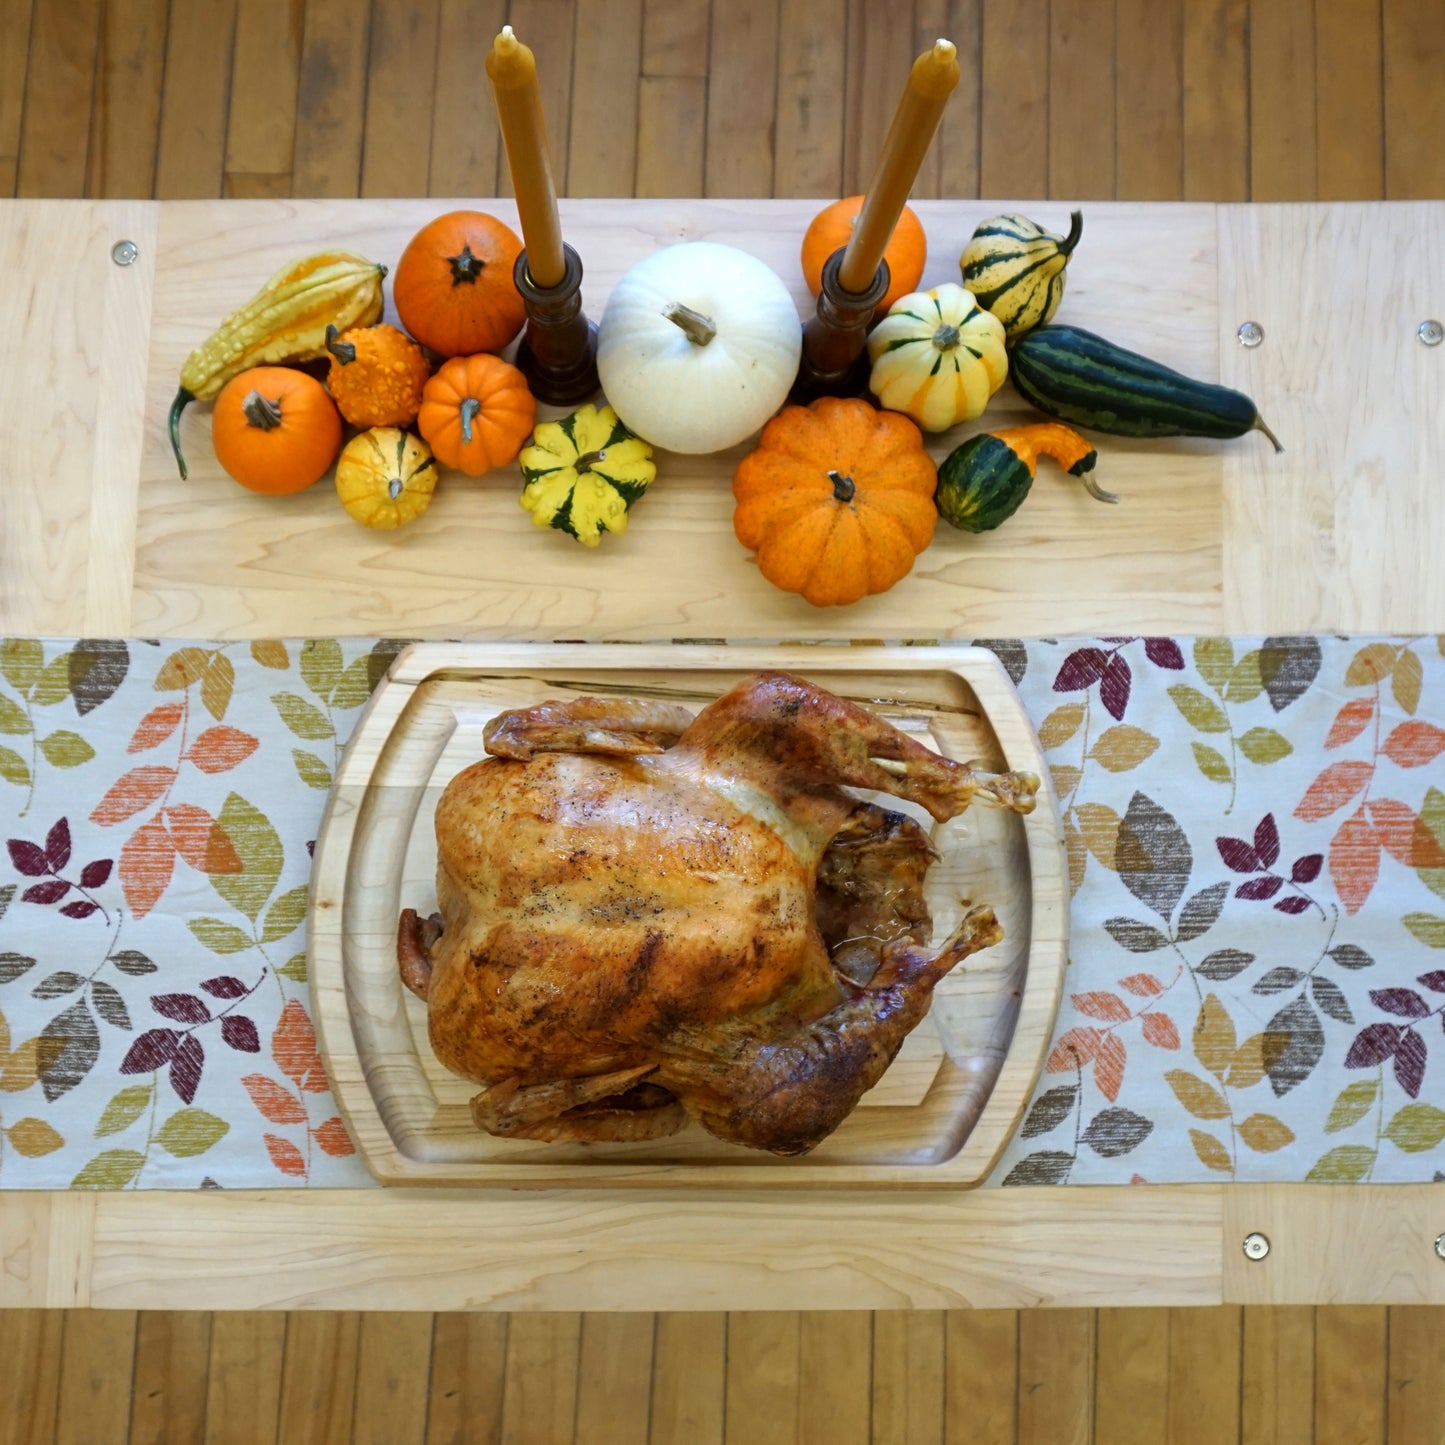 JK-ADAMS-MAPLE-TRADITIONAL-CARVING-BOARD-LIFESTYLE-ROAST-TURKEY-BOARD-ON-MAPLE-TABLE-WITH-CANDLES-AND-PUMPKINS